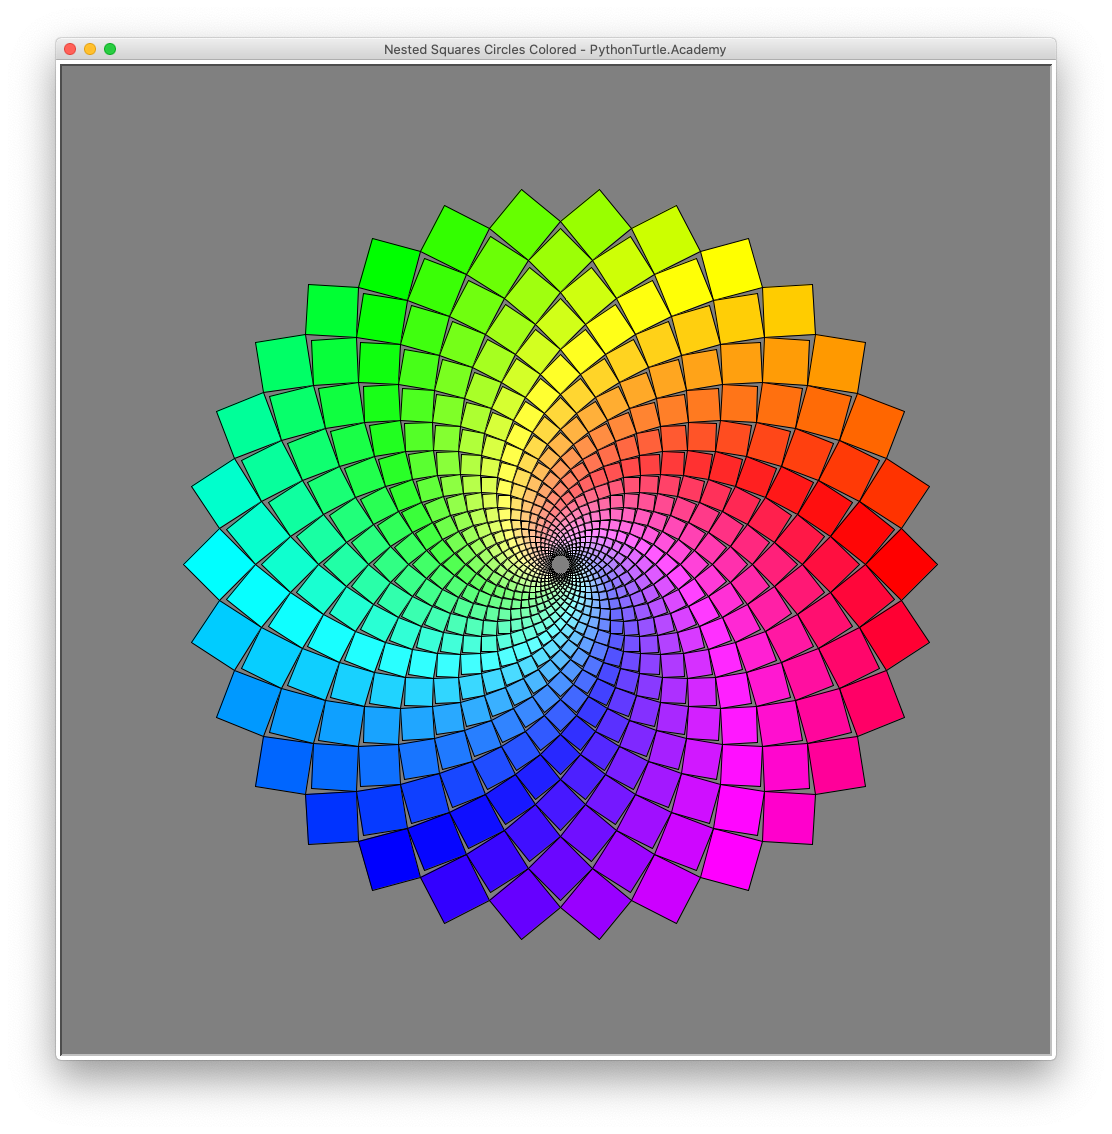 Colored Nested Circle of Squares with Python and Turtle – Python and Turtle